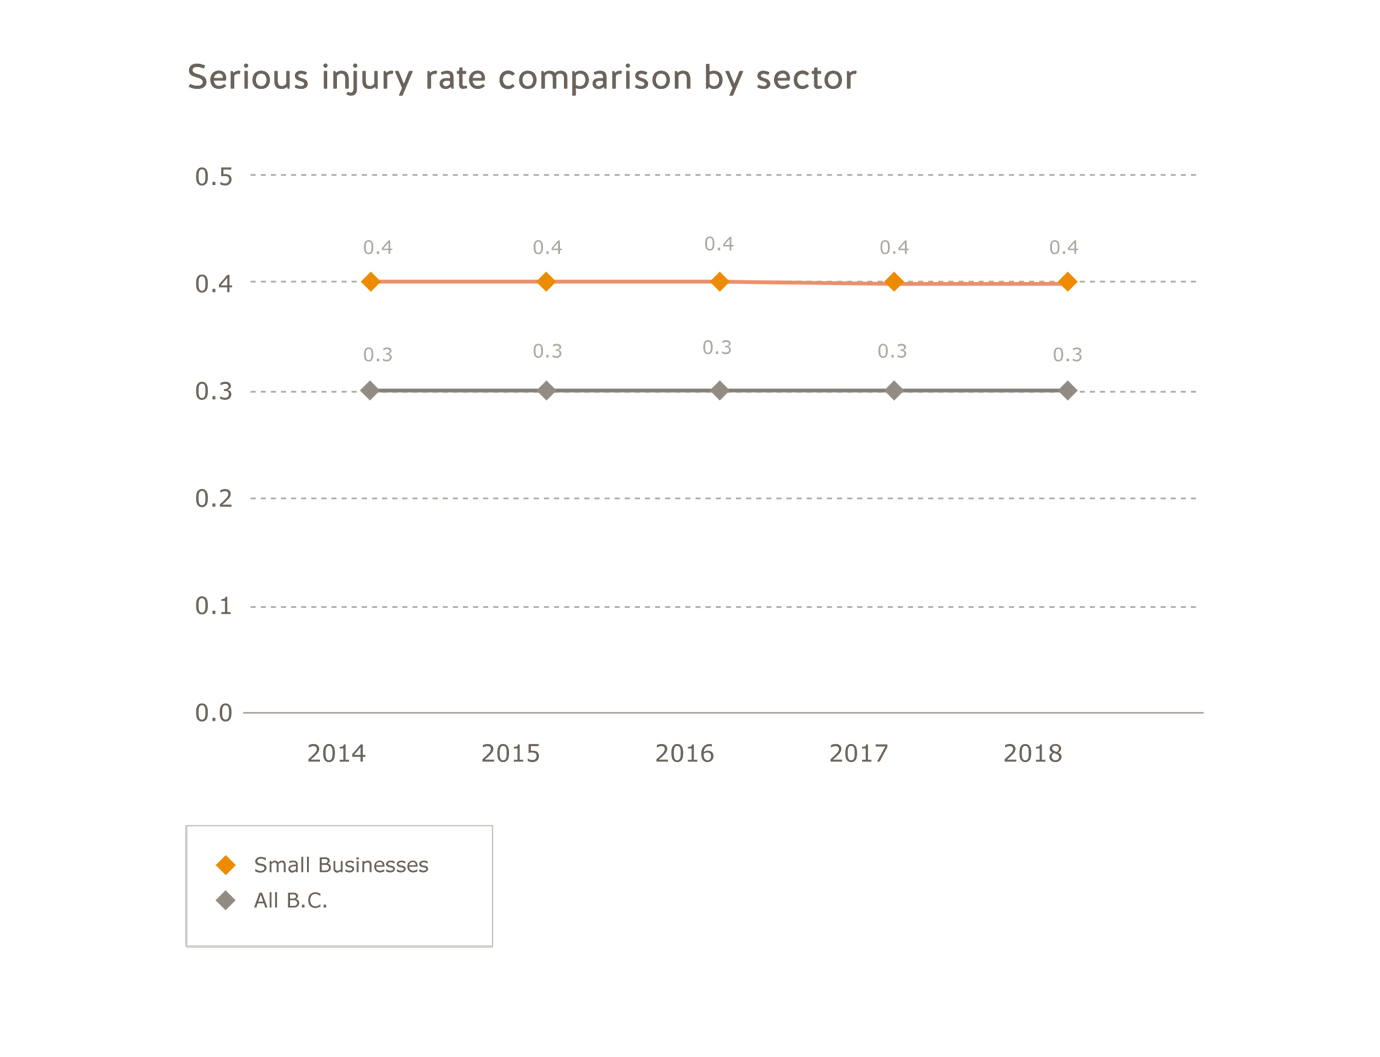 Small business sector serious injury rate comparison by sector for 2014 to 2018. Small businesses: 2014=0.4; 2015=0.4; 2016=0.4; 2017=0.4; 2018=0.4. All B.C.: 2014=-0.3; 2015=0.3; 2016=0.3; 2017=0.3; 2018=0.3